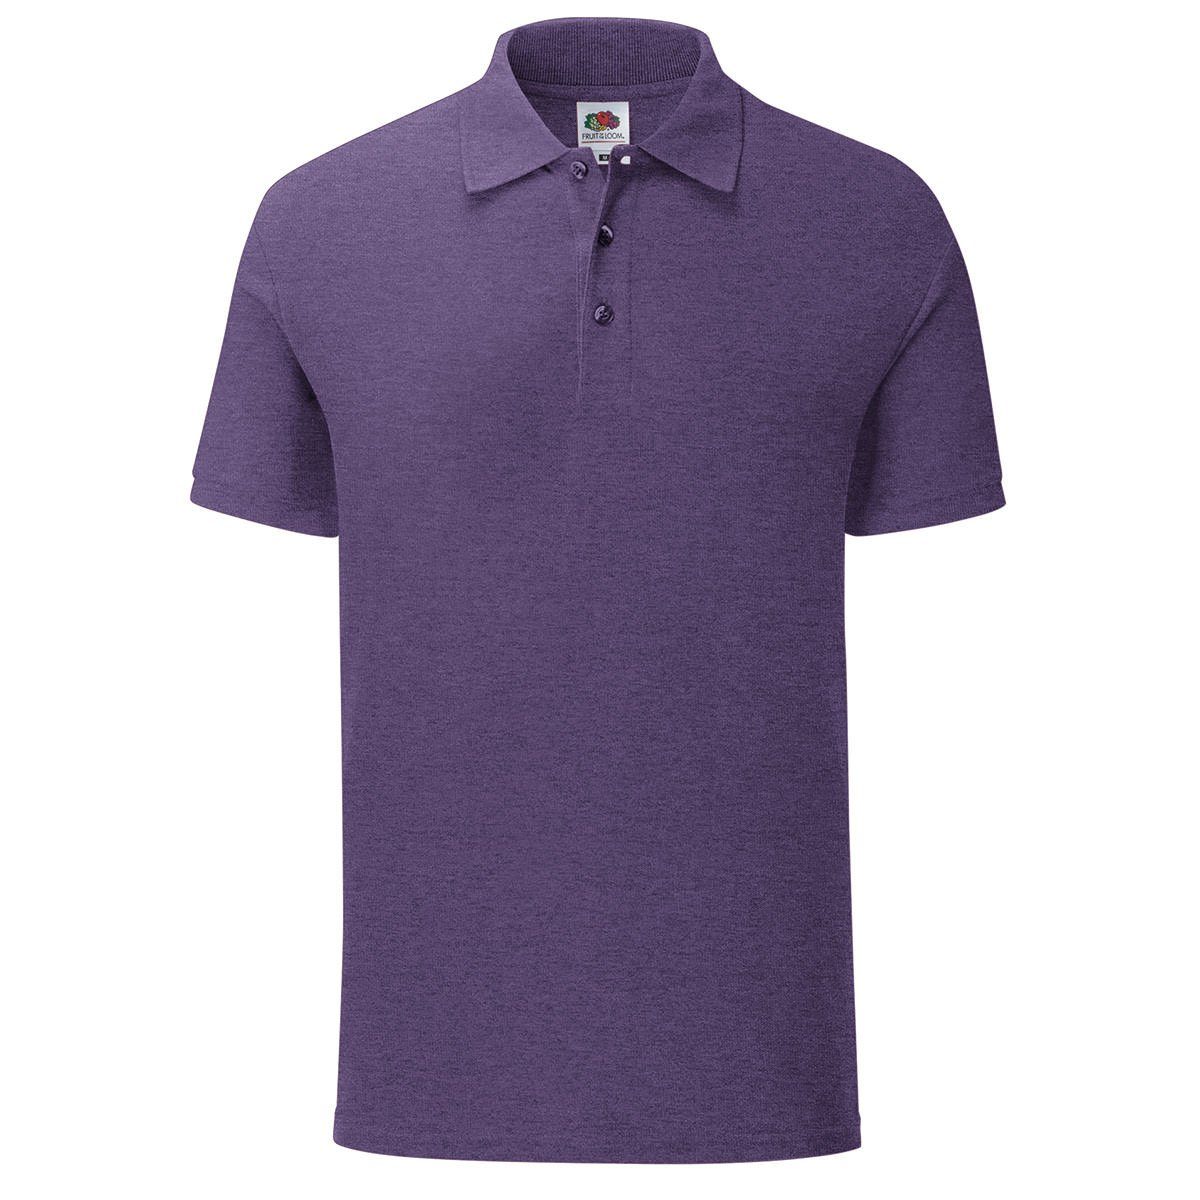 the of meliert Fruit Fruit Polo Loom of Poloshirt Loom Iconic the violett